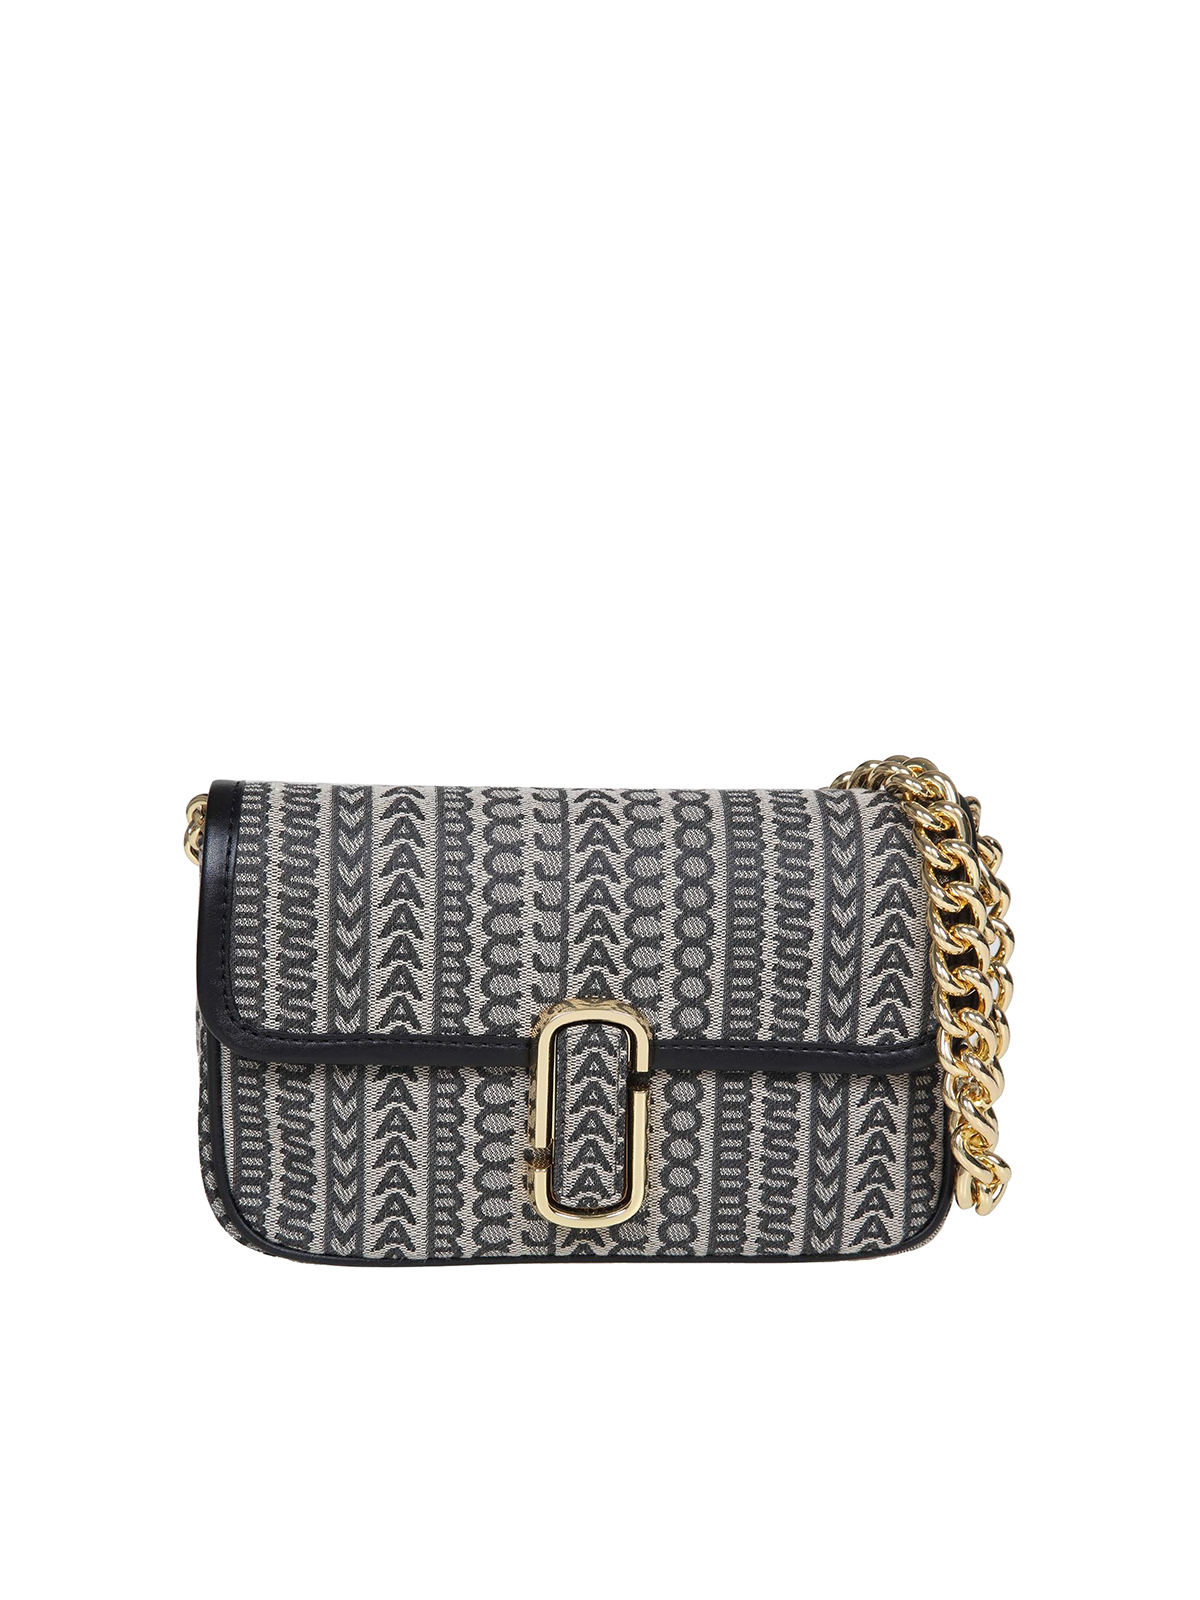 Marc Jacobs Bag In Embroidered Fabric In Grey